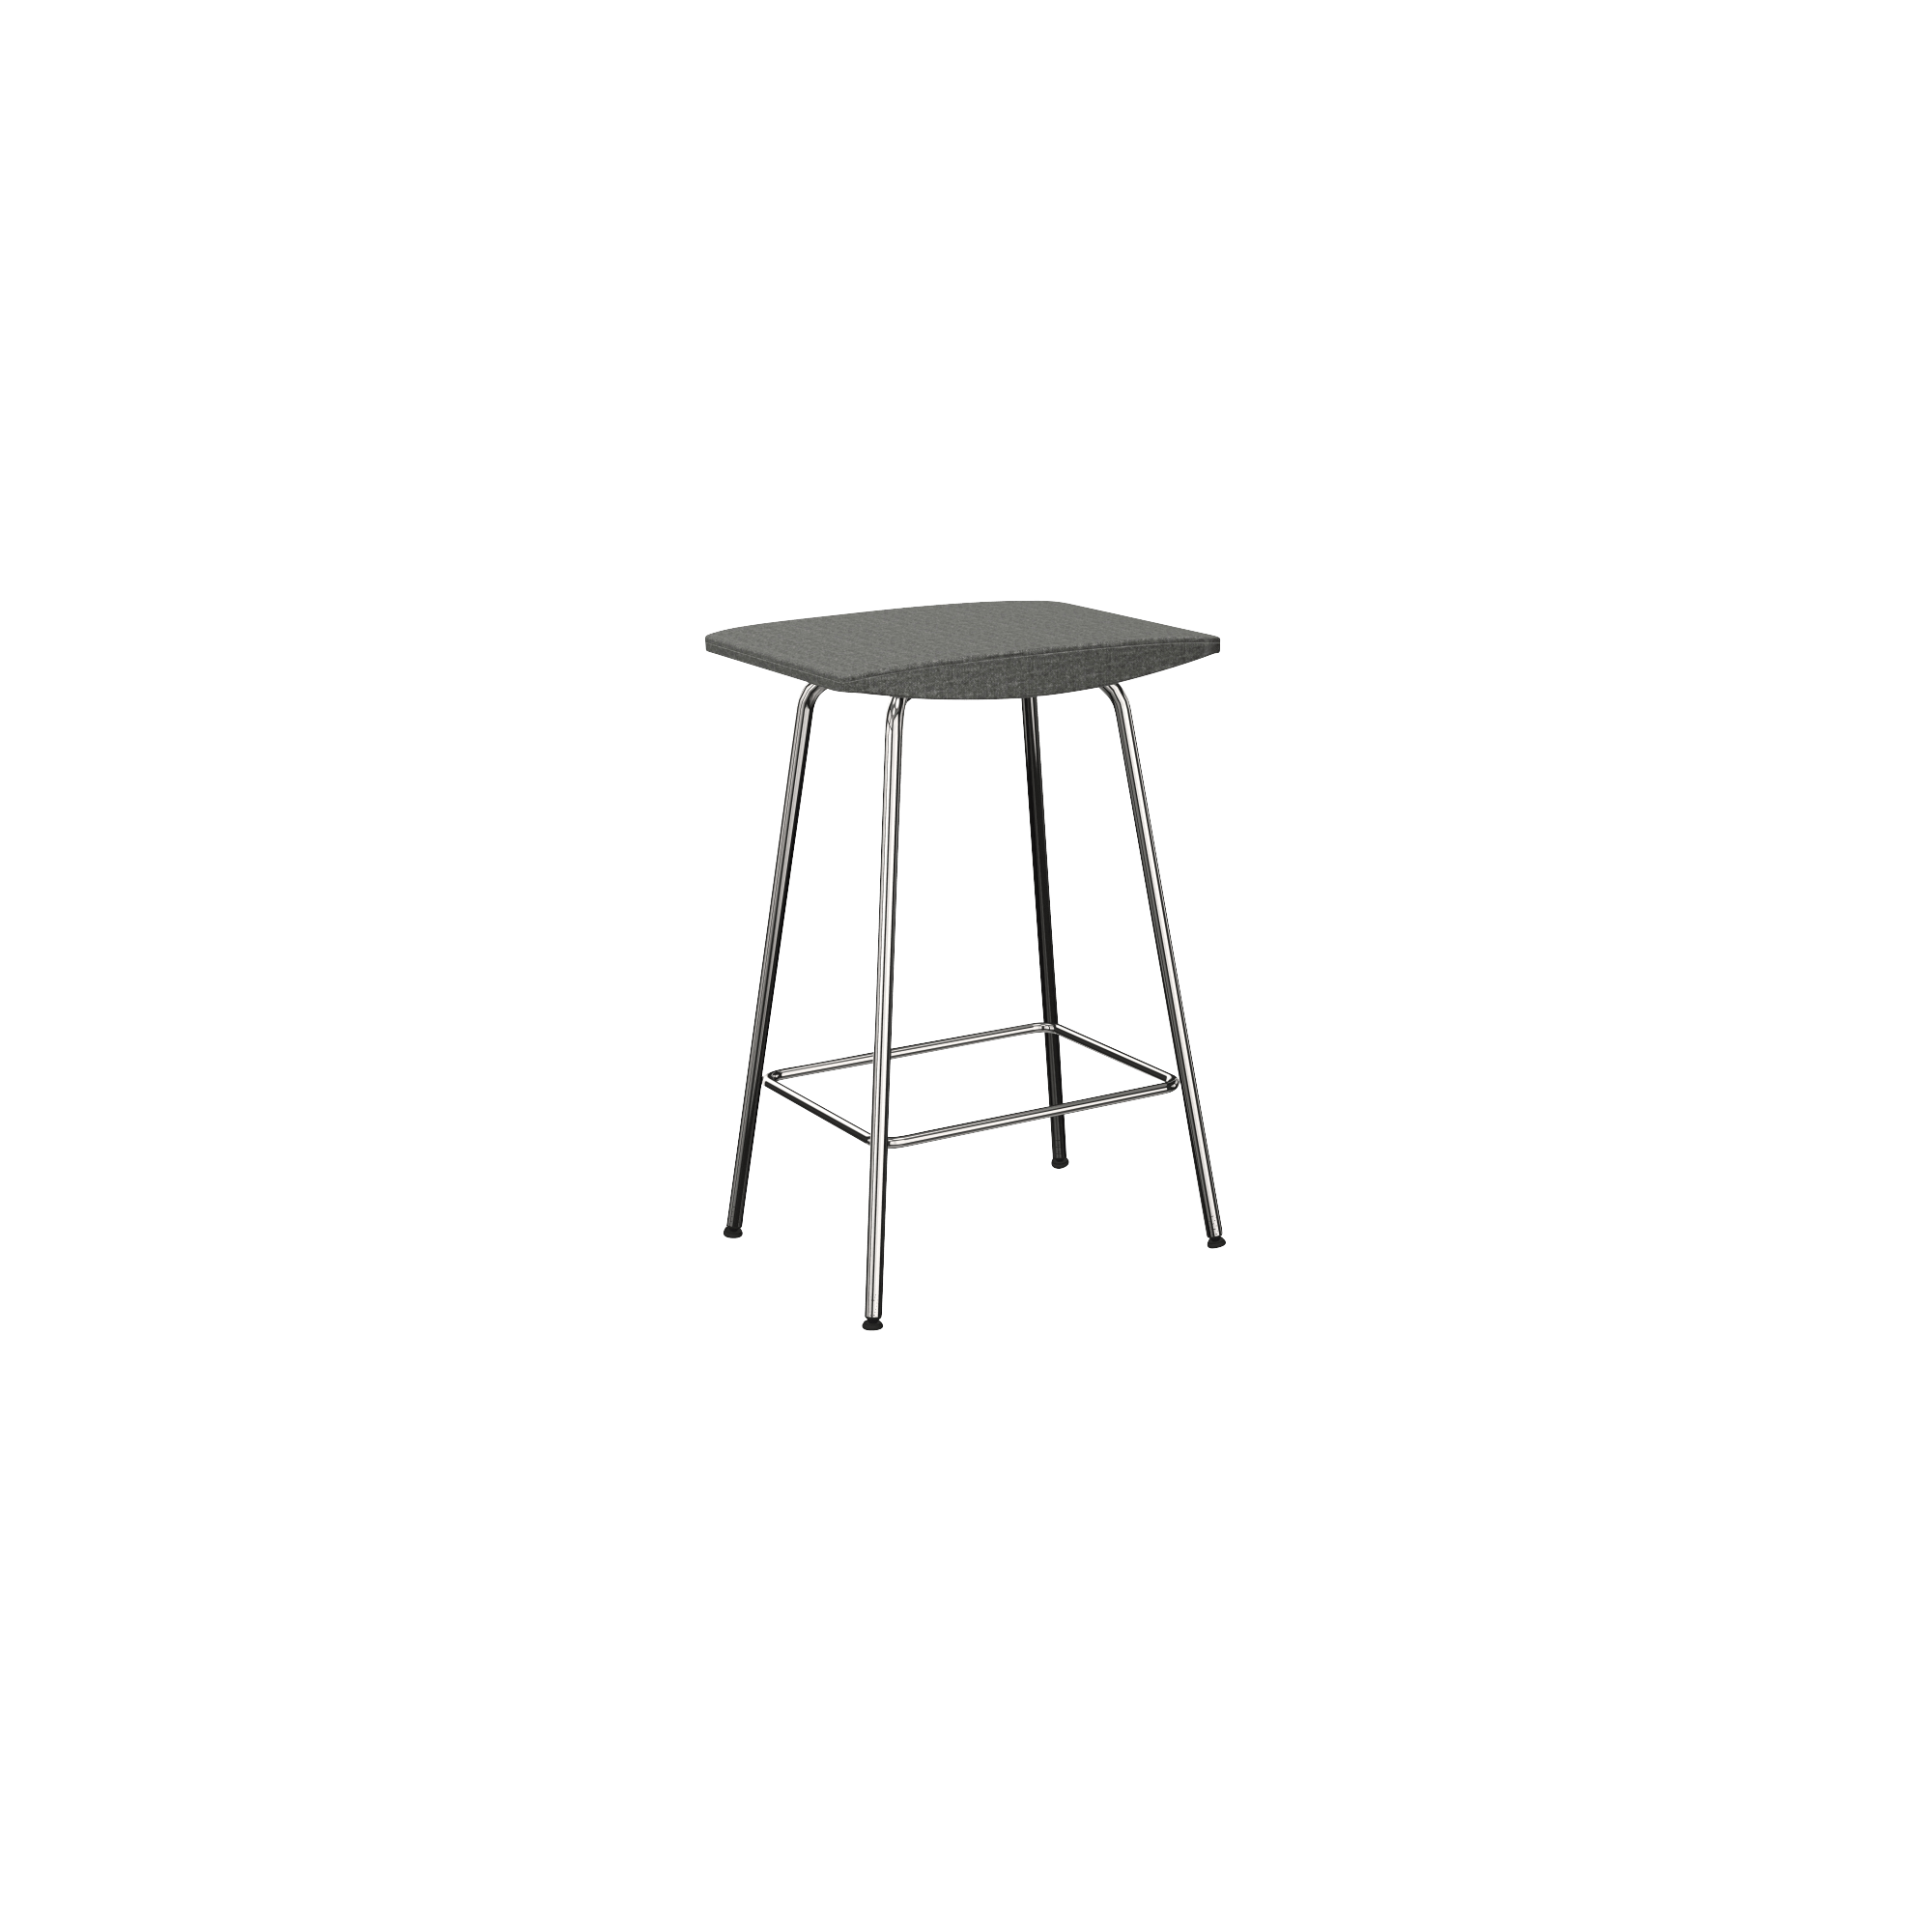 stool with grey seat and metal legs